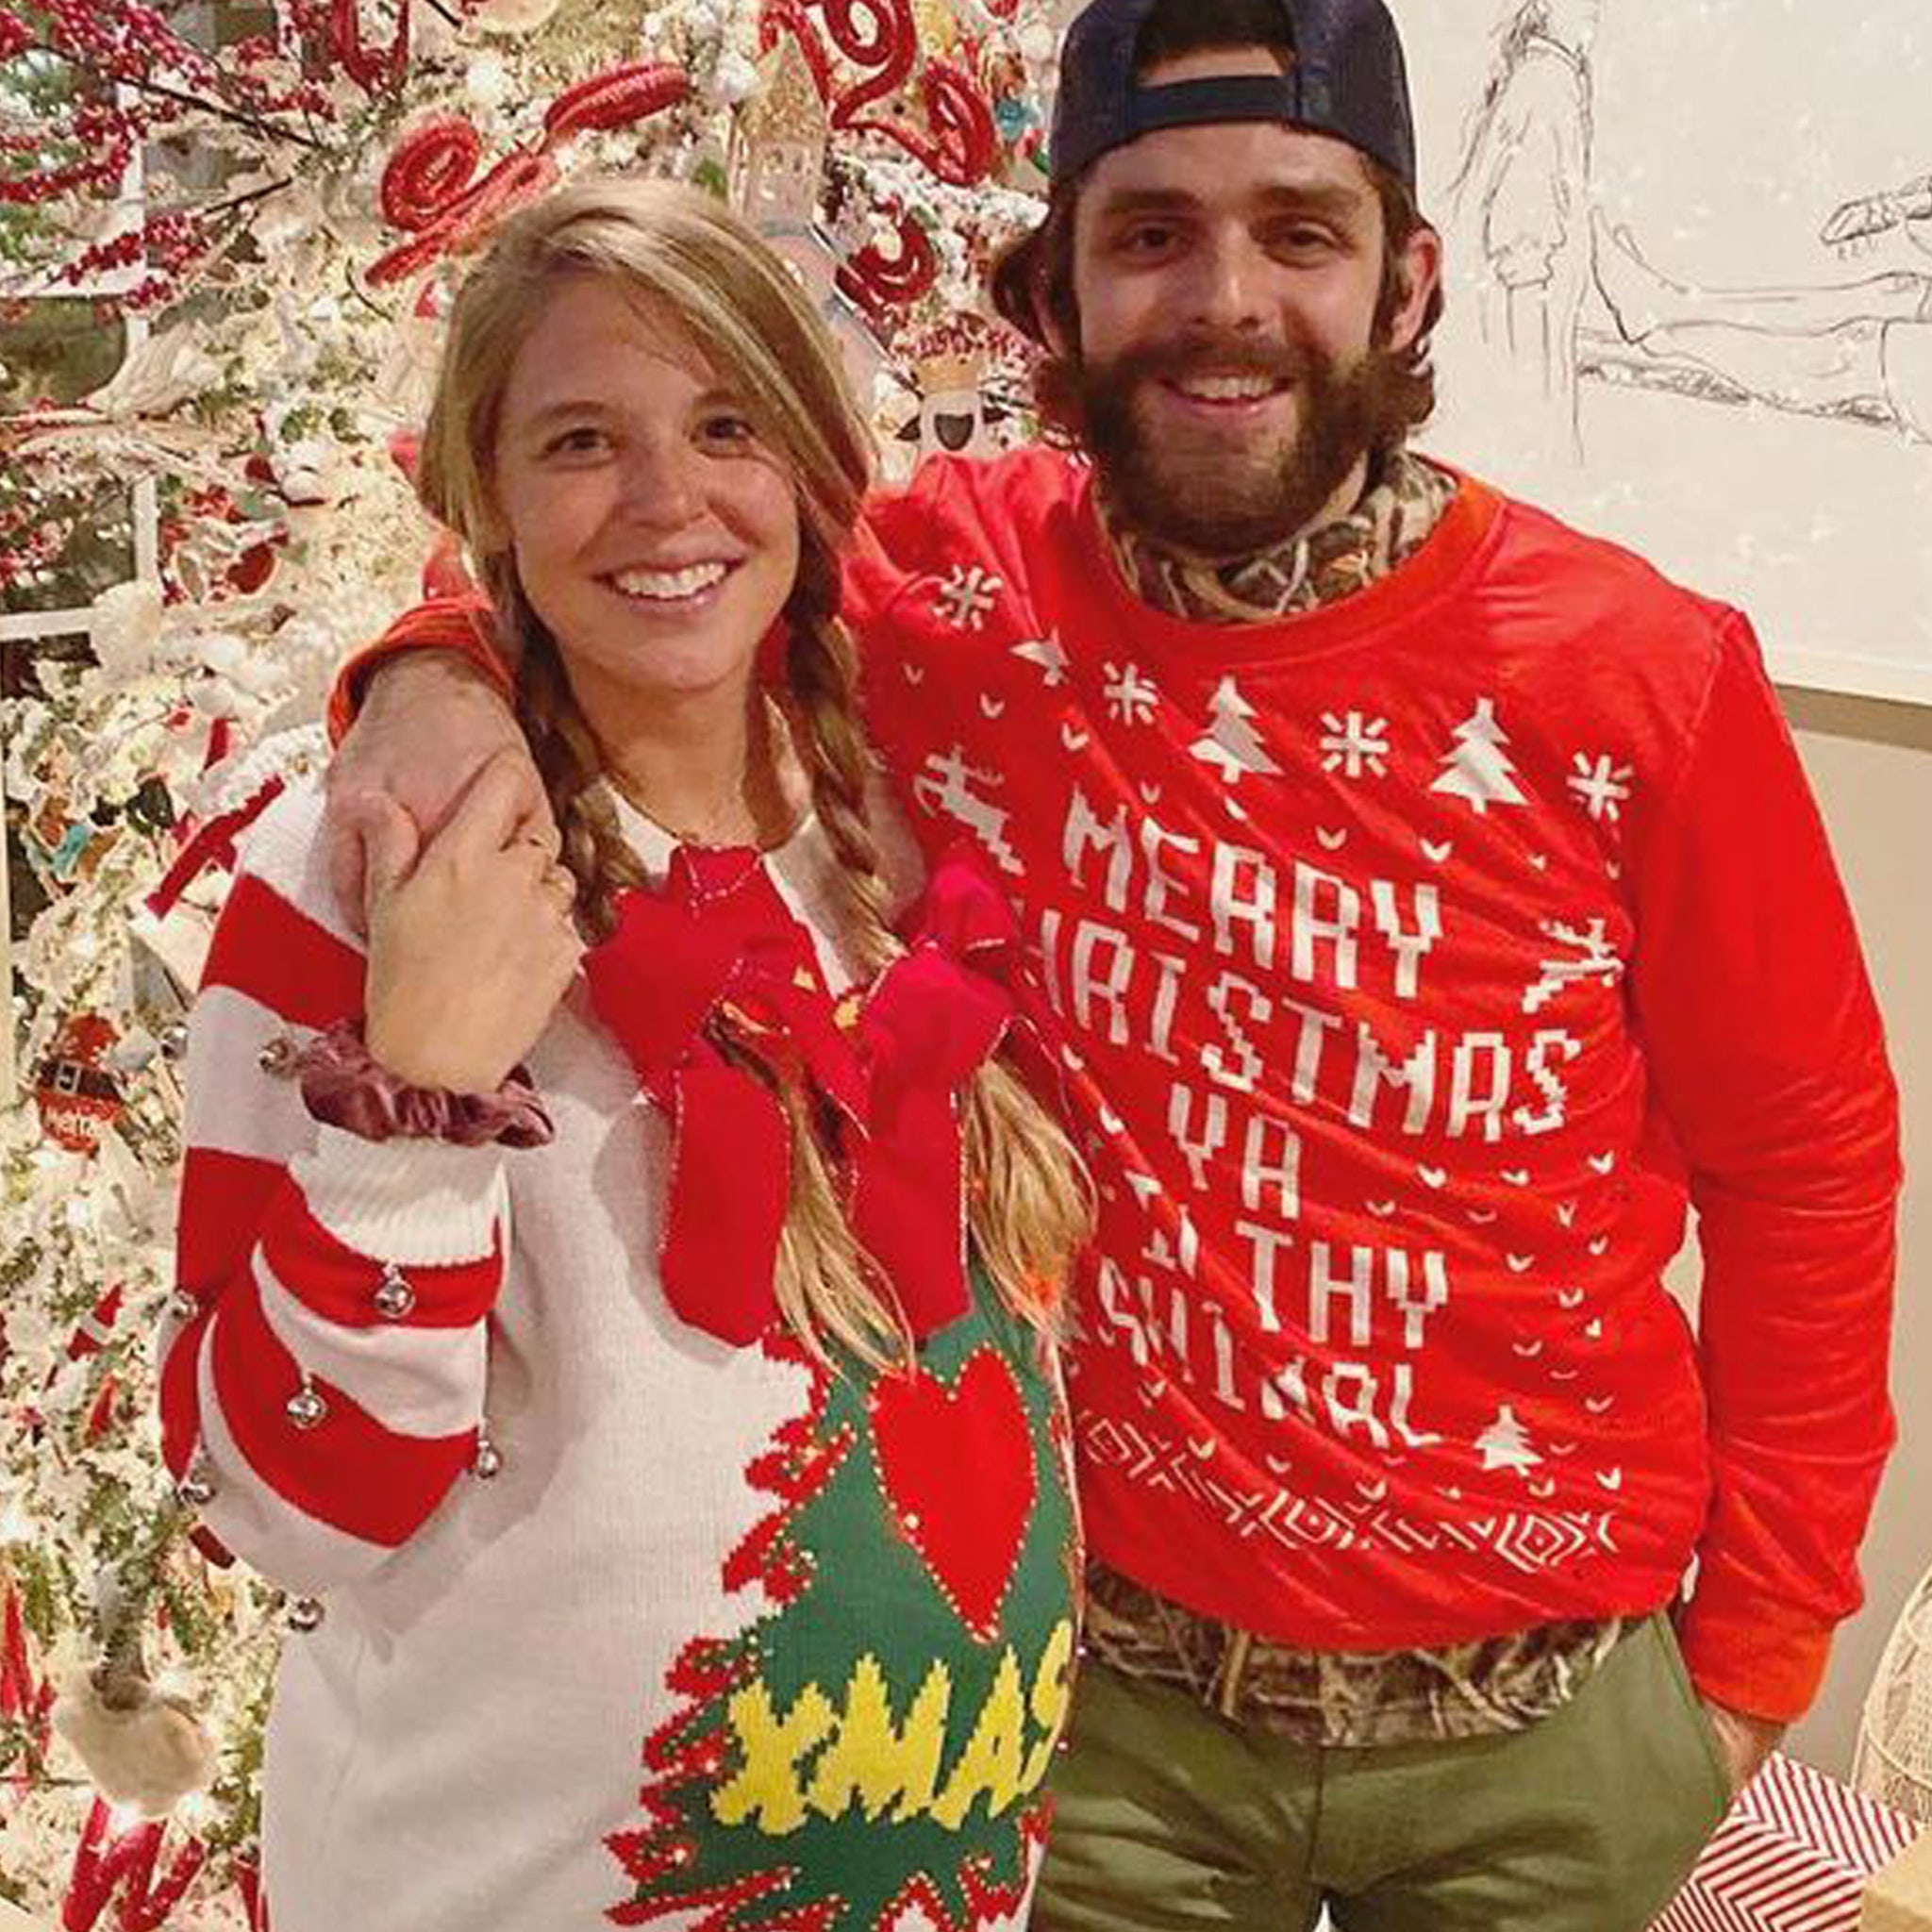 Celebs wearing ugly Christmas sweaters, Gallery